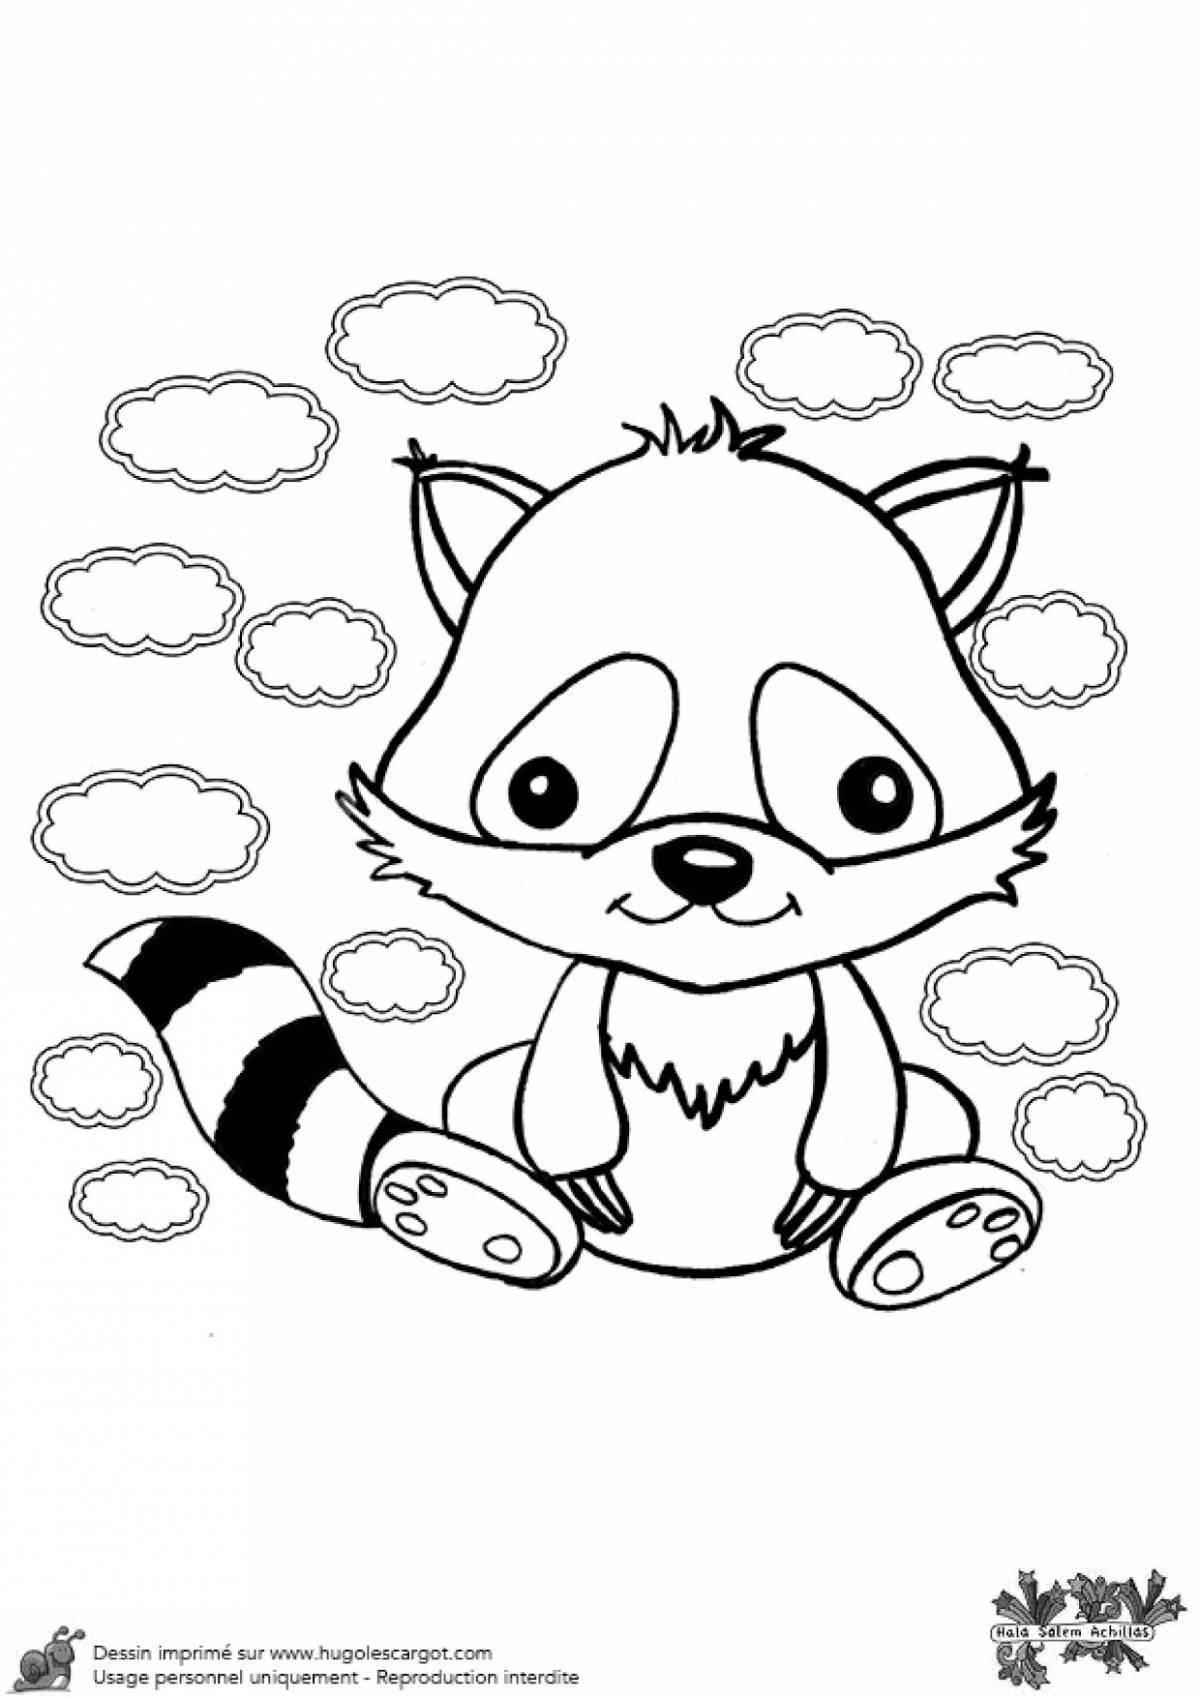 Amazing coloring pages small animals